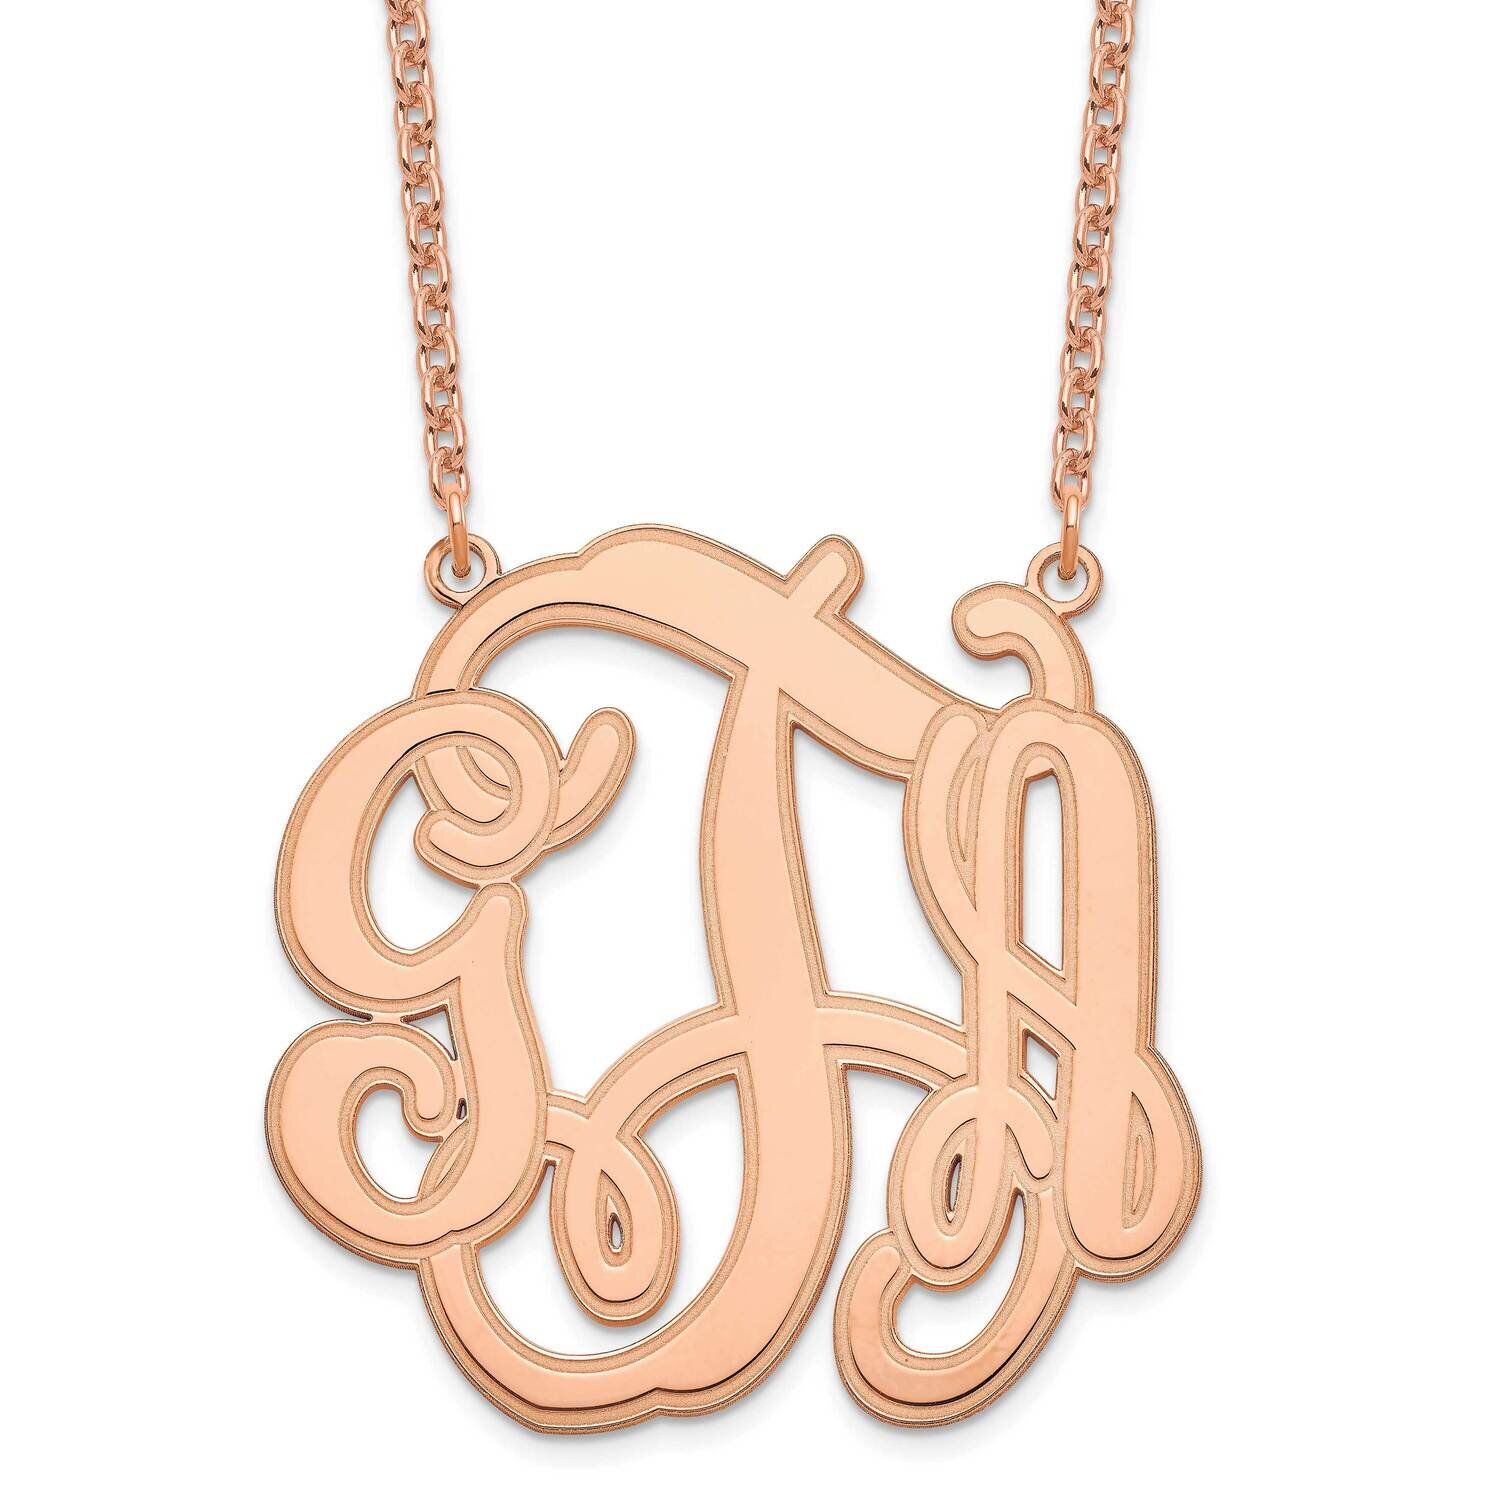 Circular Etched Monogram Necklace Sterling Silver Rose-plated XNA554RP